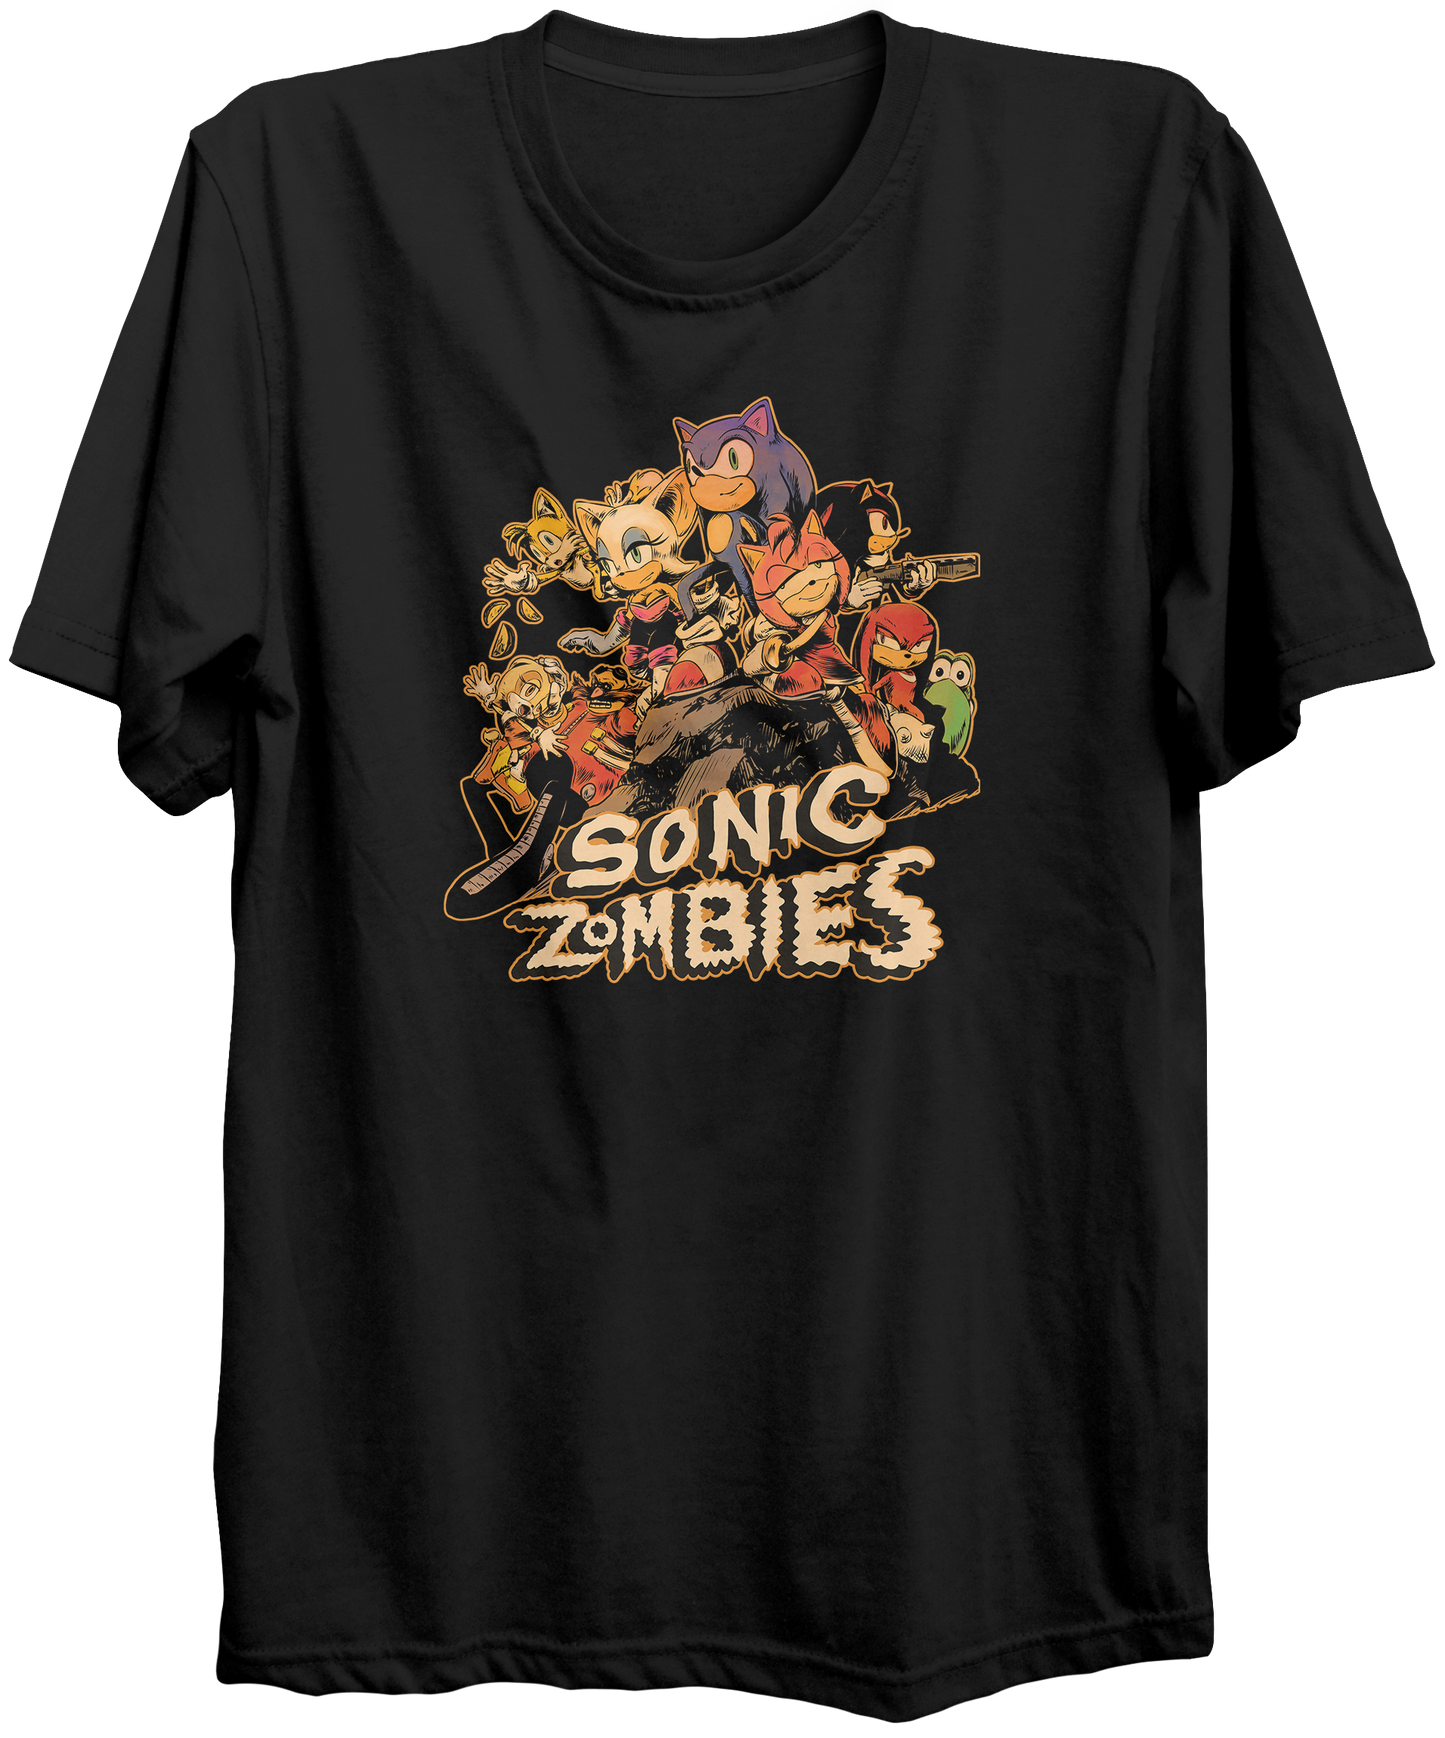 Sonic Zombies - Balena Productions